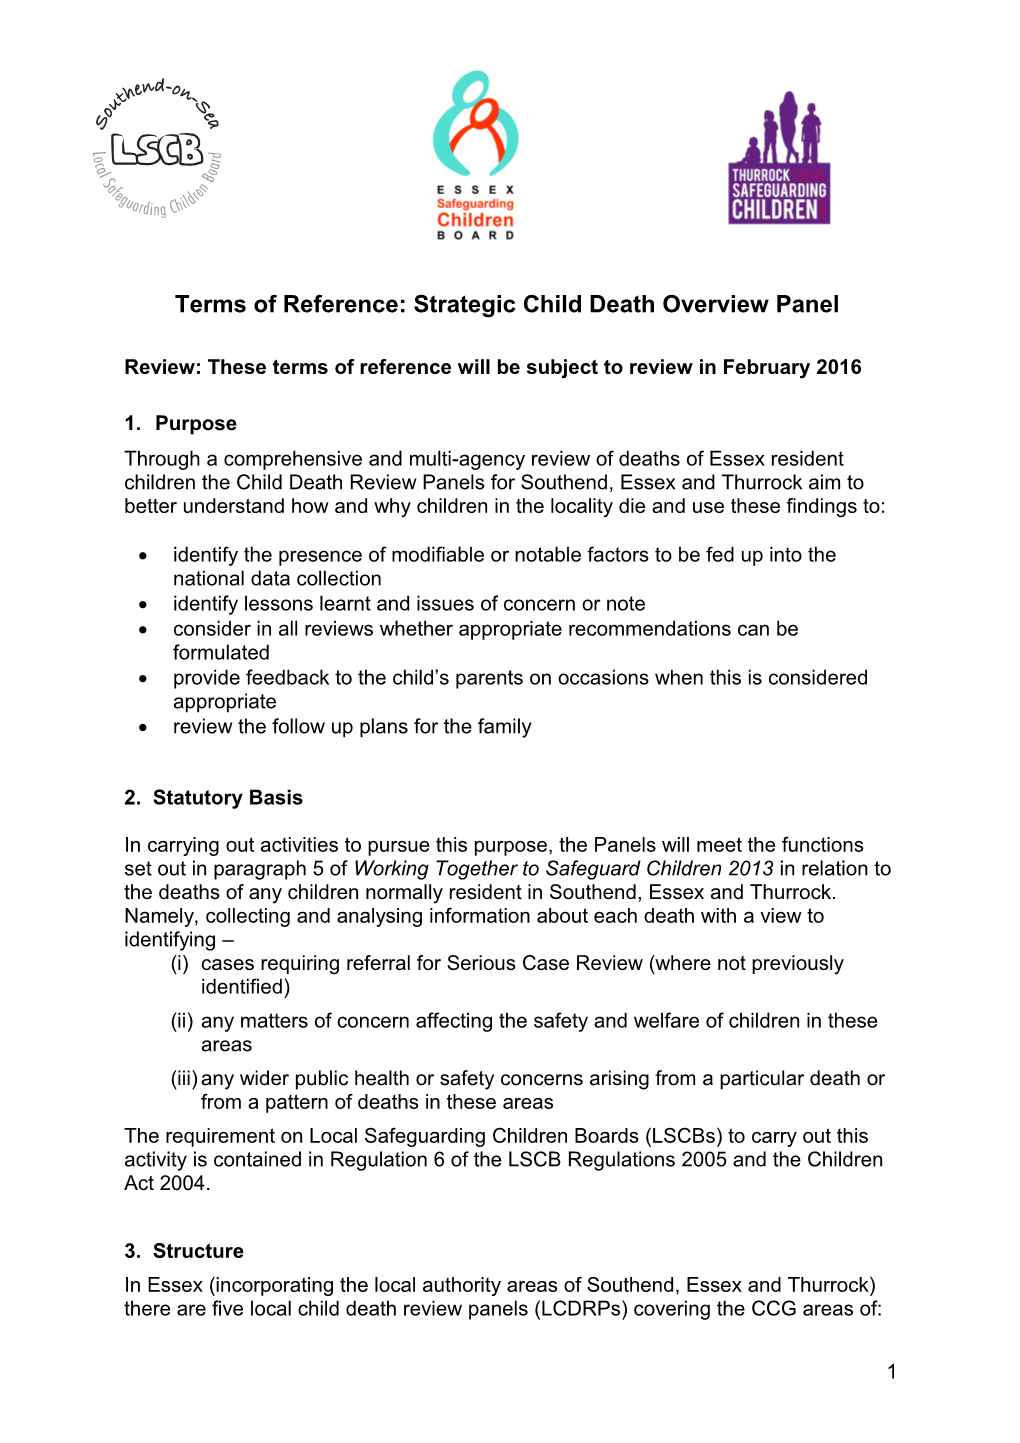 Terms of Reference: Local Child Death Overview Panels